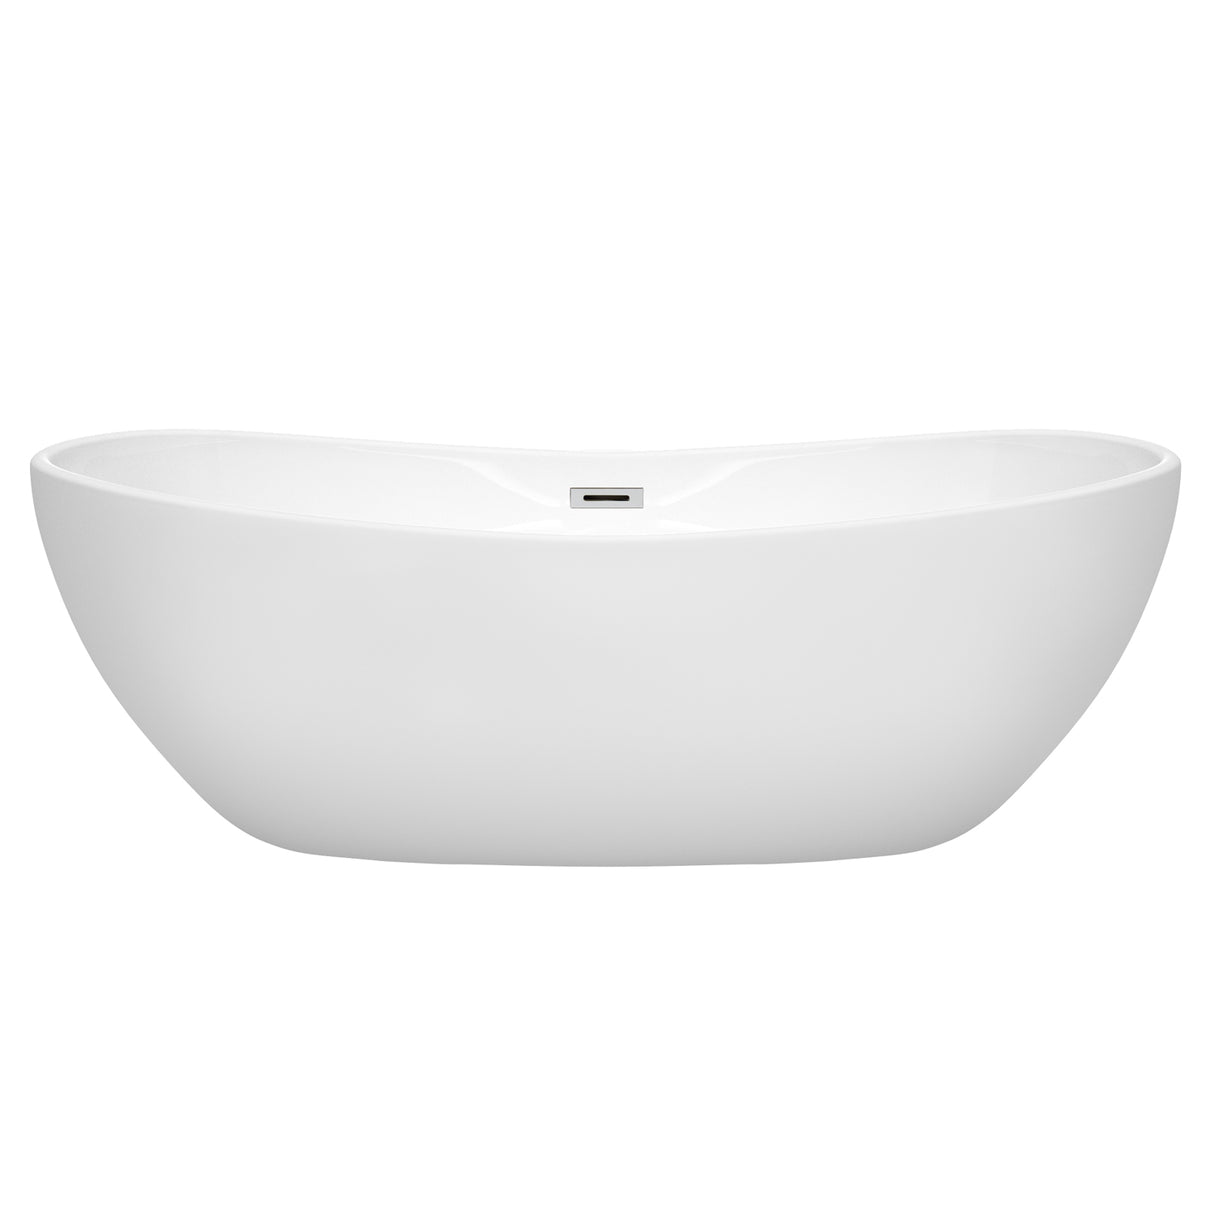 Rebecca 70 Inch Freestanding Bathtub in White with Polished Chrome Drain and Overflow Trim